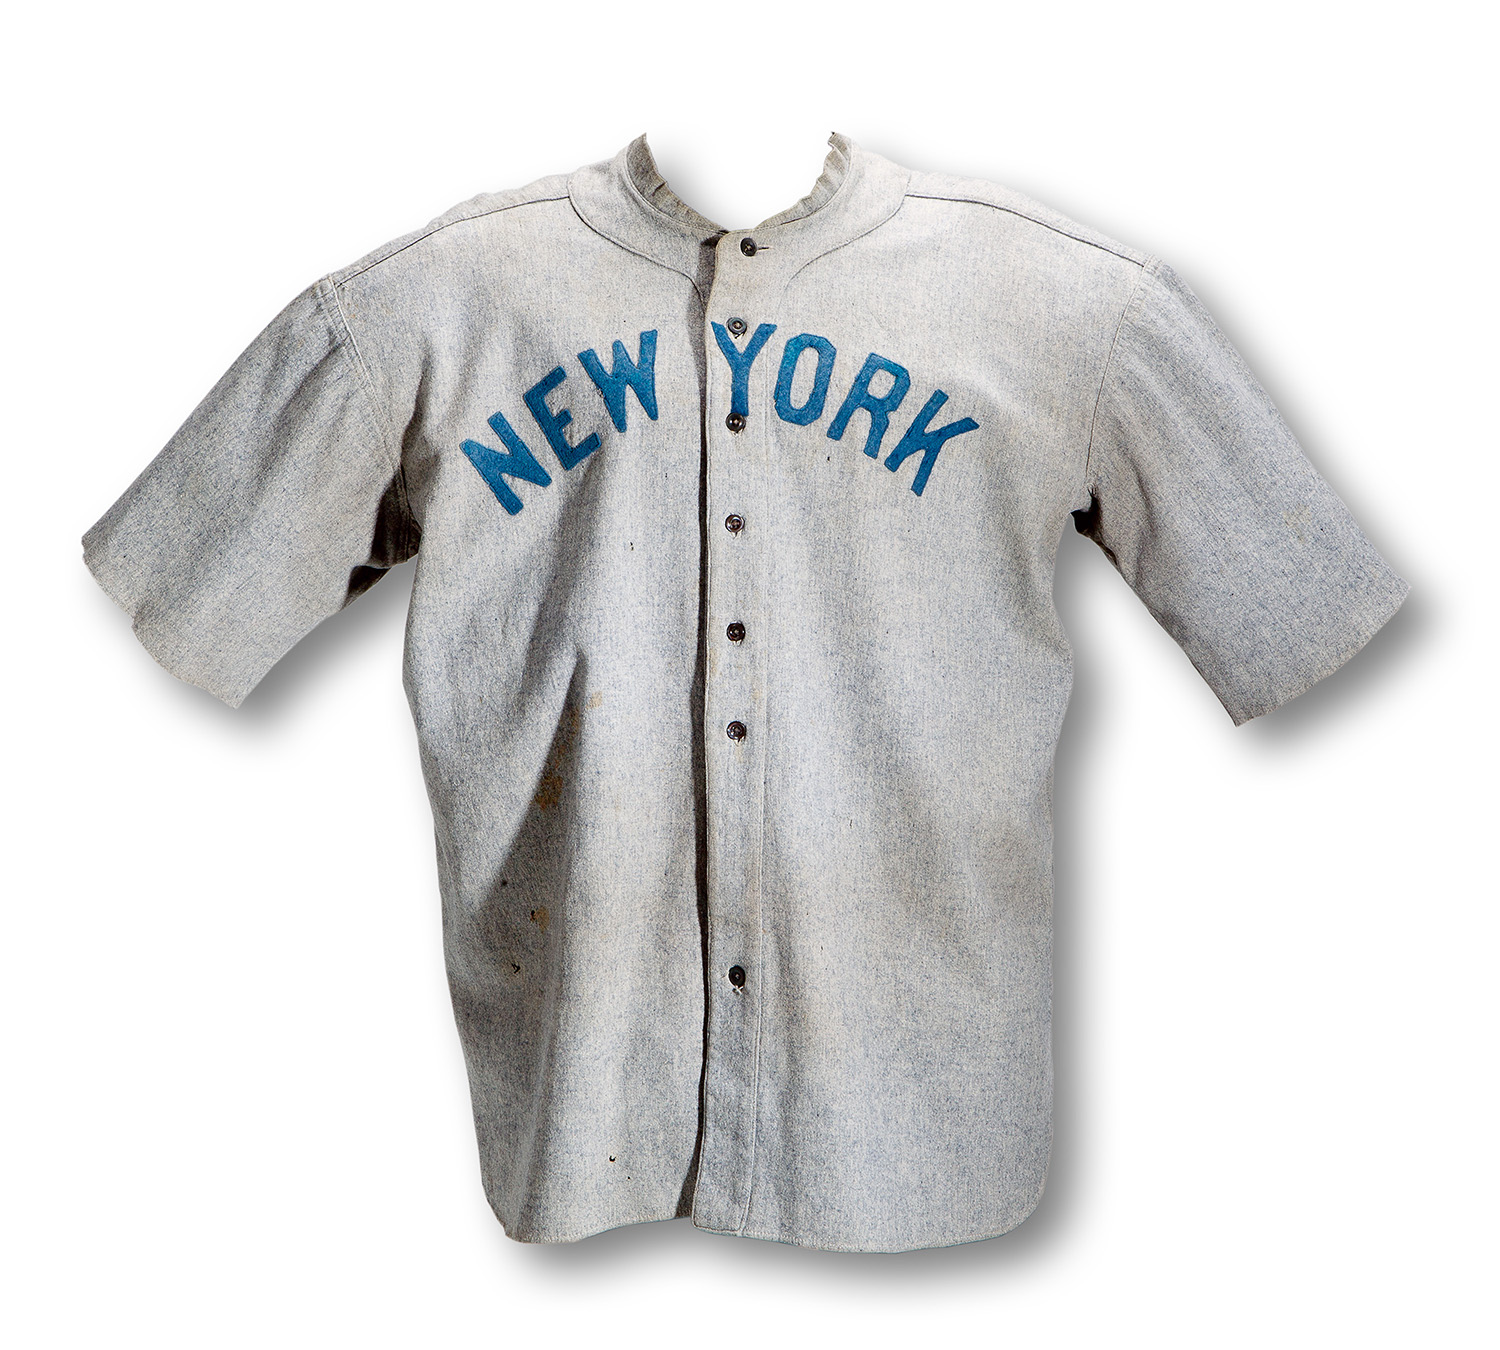 babe ruth jersey real